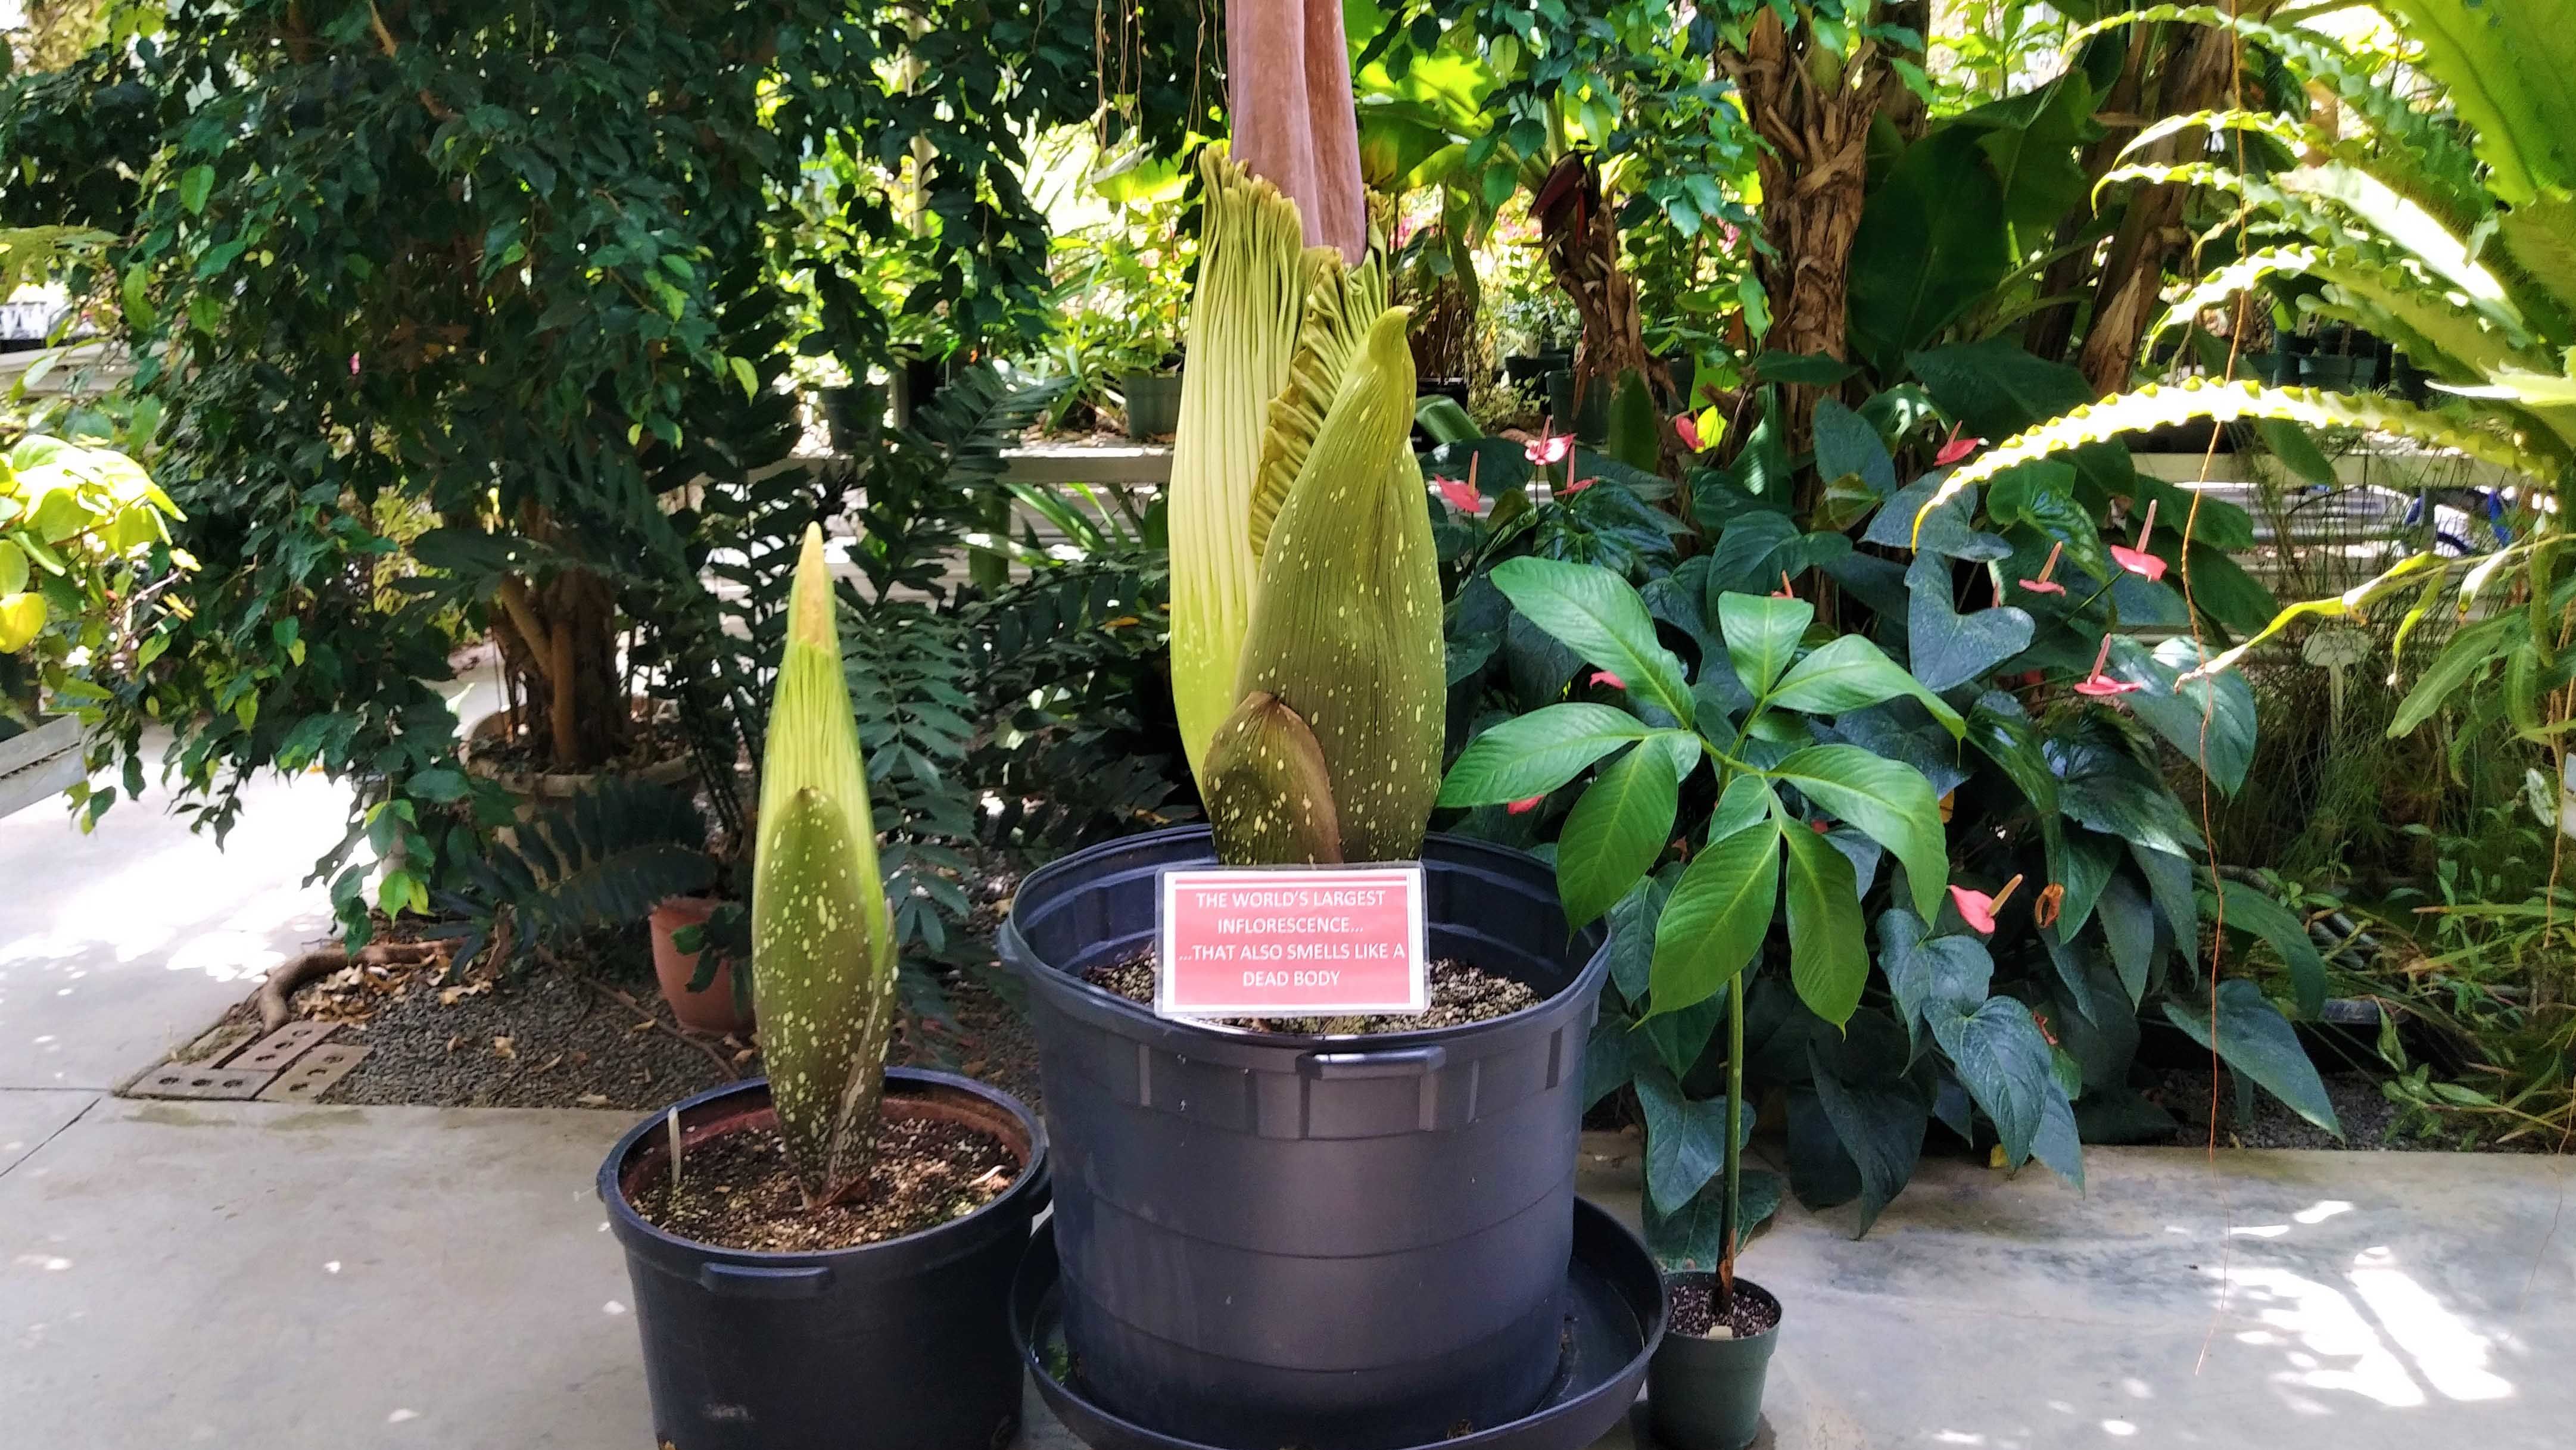 One large and one small corpse flower prepare to bloom.